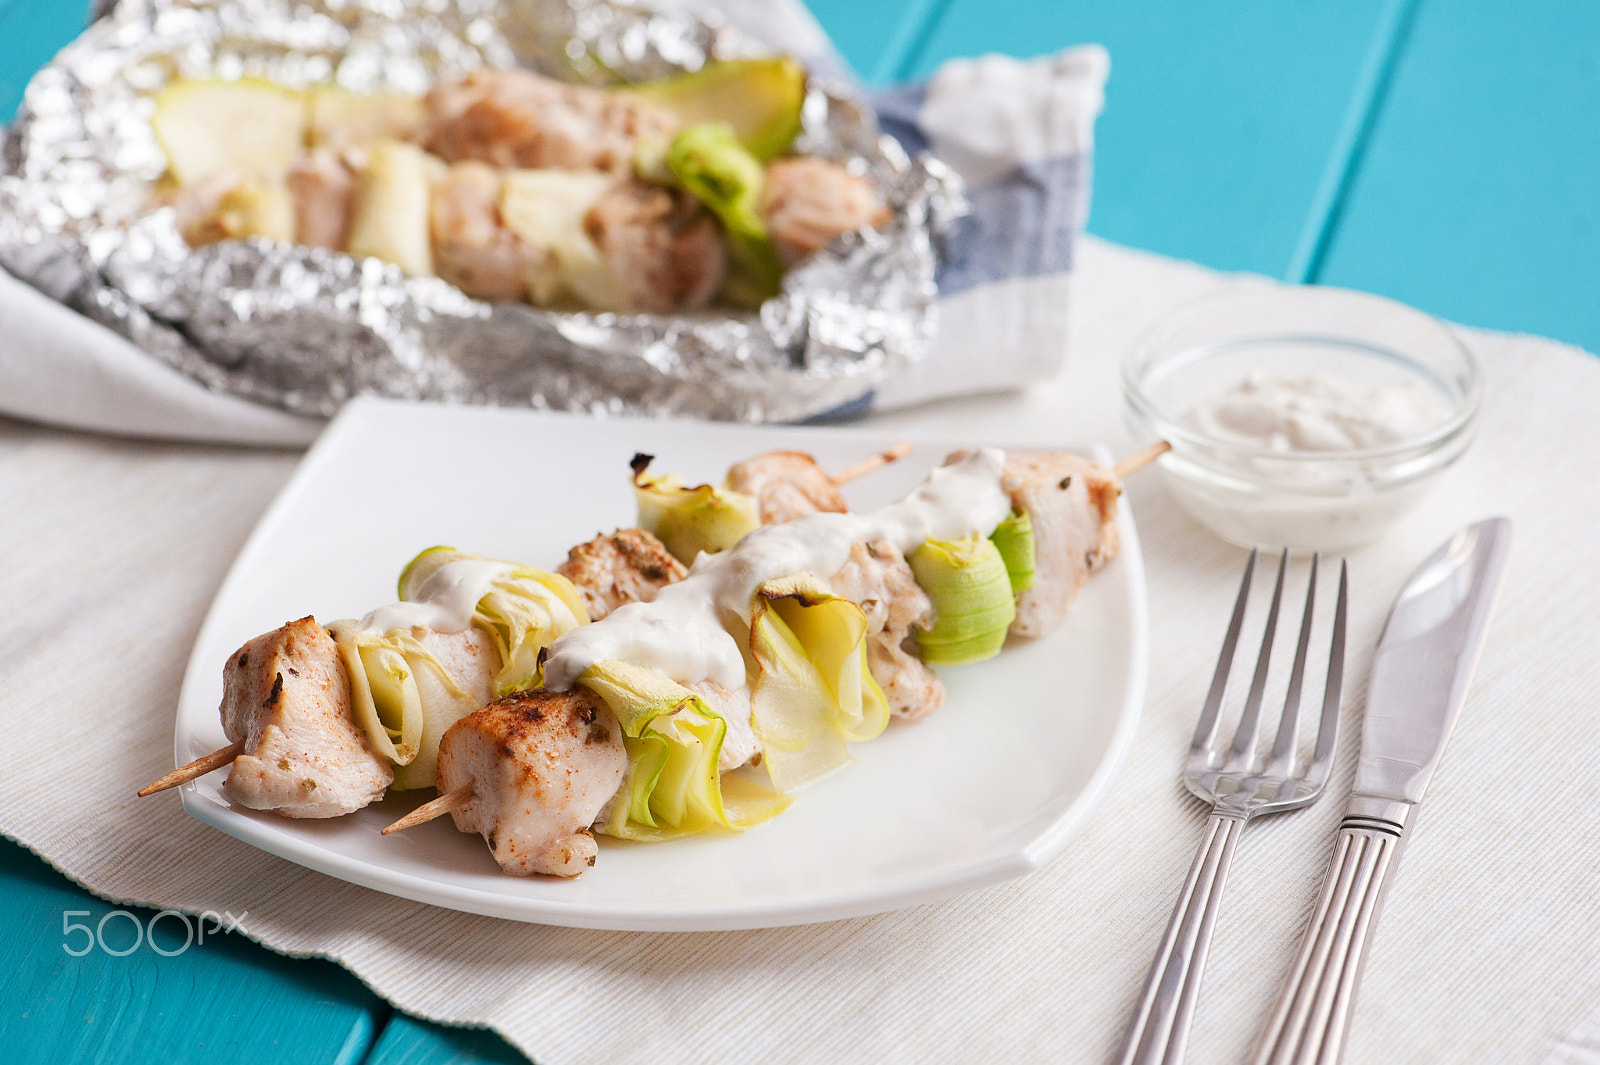 Nikon D700 + Nikon AF-S Micro-Nikkor 105mm F2.8G IF-ED VR sample photo. Grilled chicken and zucchini with white sauce on wooden skewers photography